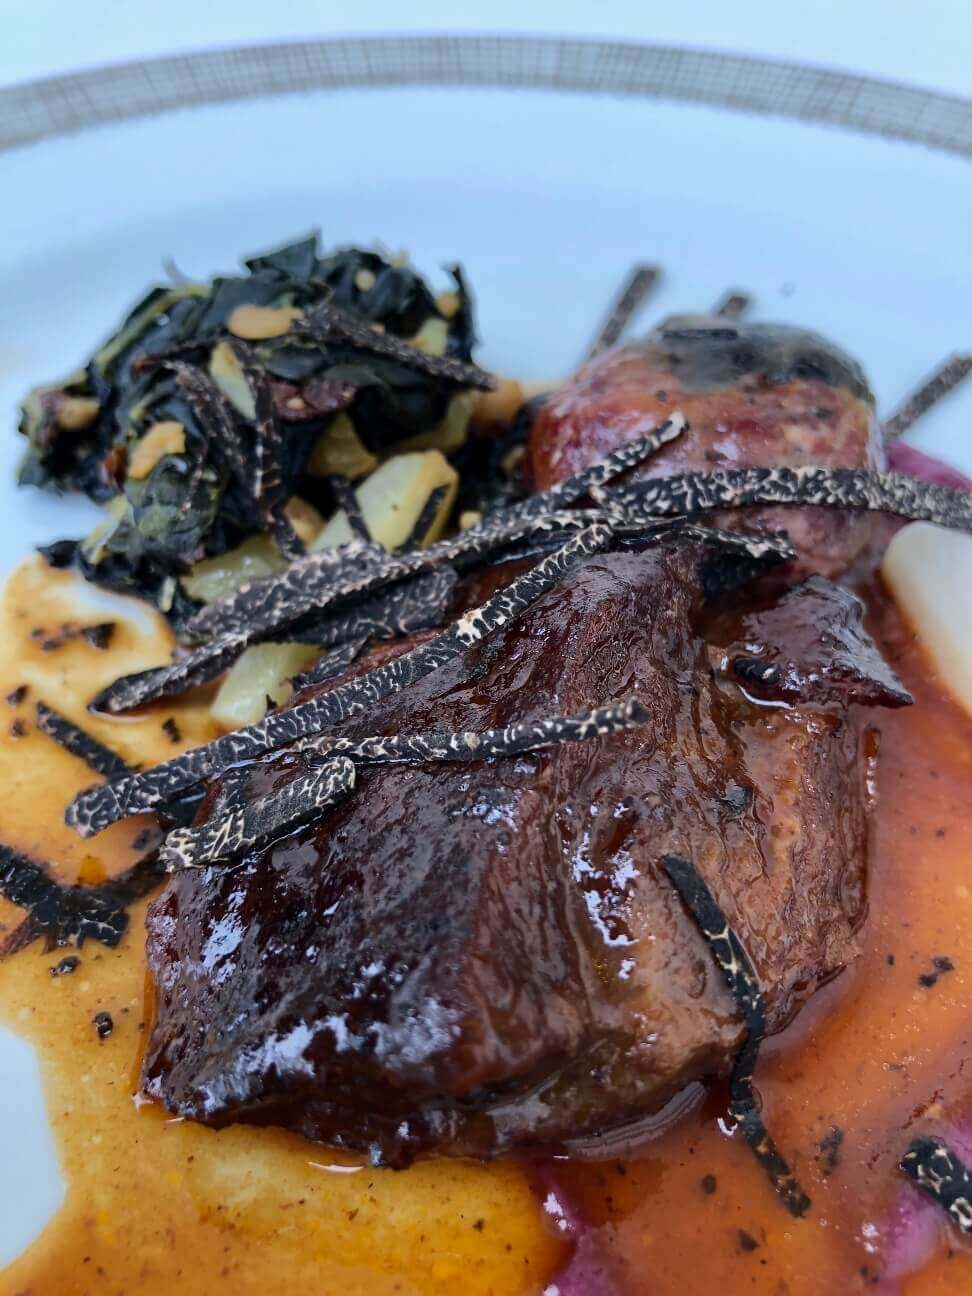 Braised Veal Cheek with Veal Crepinette, Red Cabbage Puree, Cavallo Nero, Onion & Black Truffles